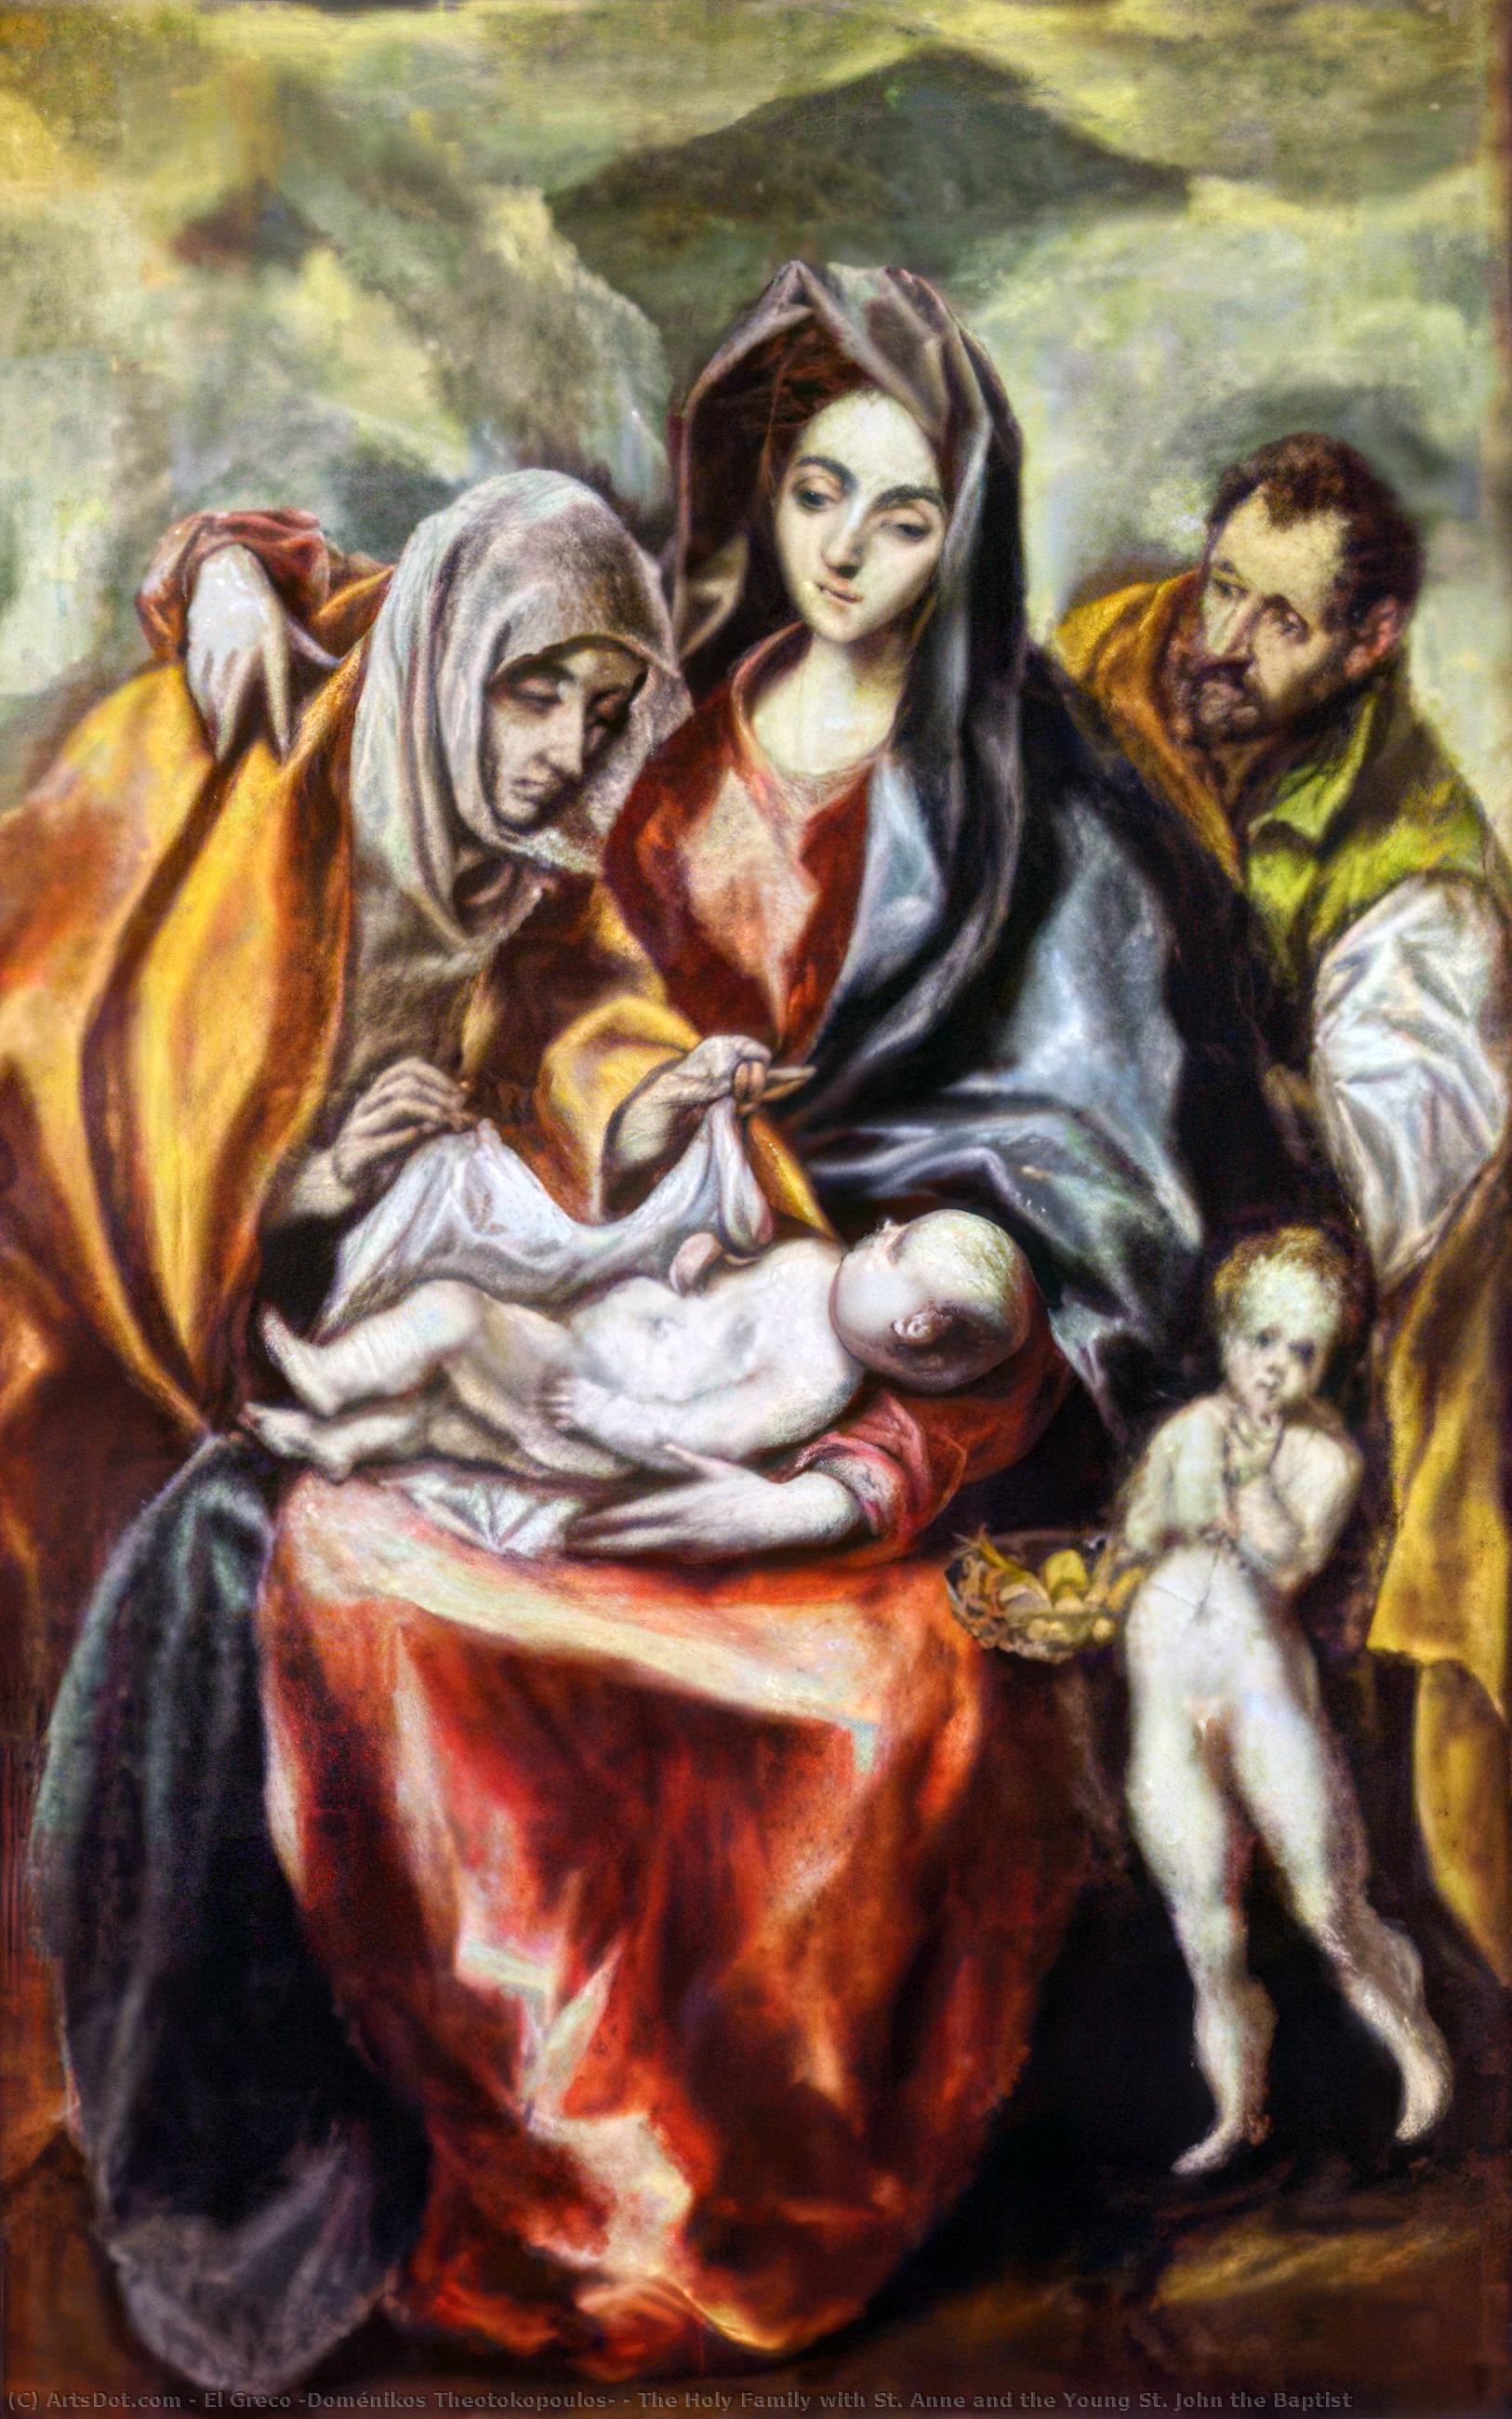 Wikioo.org - สารานุกรมวิจิตรศิลป์ - จิตรกรรม El Greco (Doménikos Theotokopoulos) - The Holy Family with St. Anne and the Young St. John the Baptist